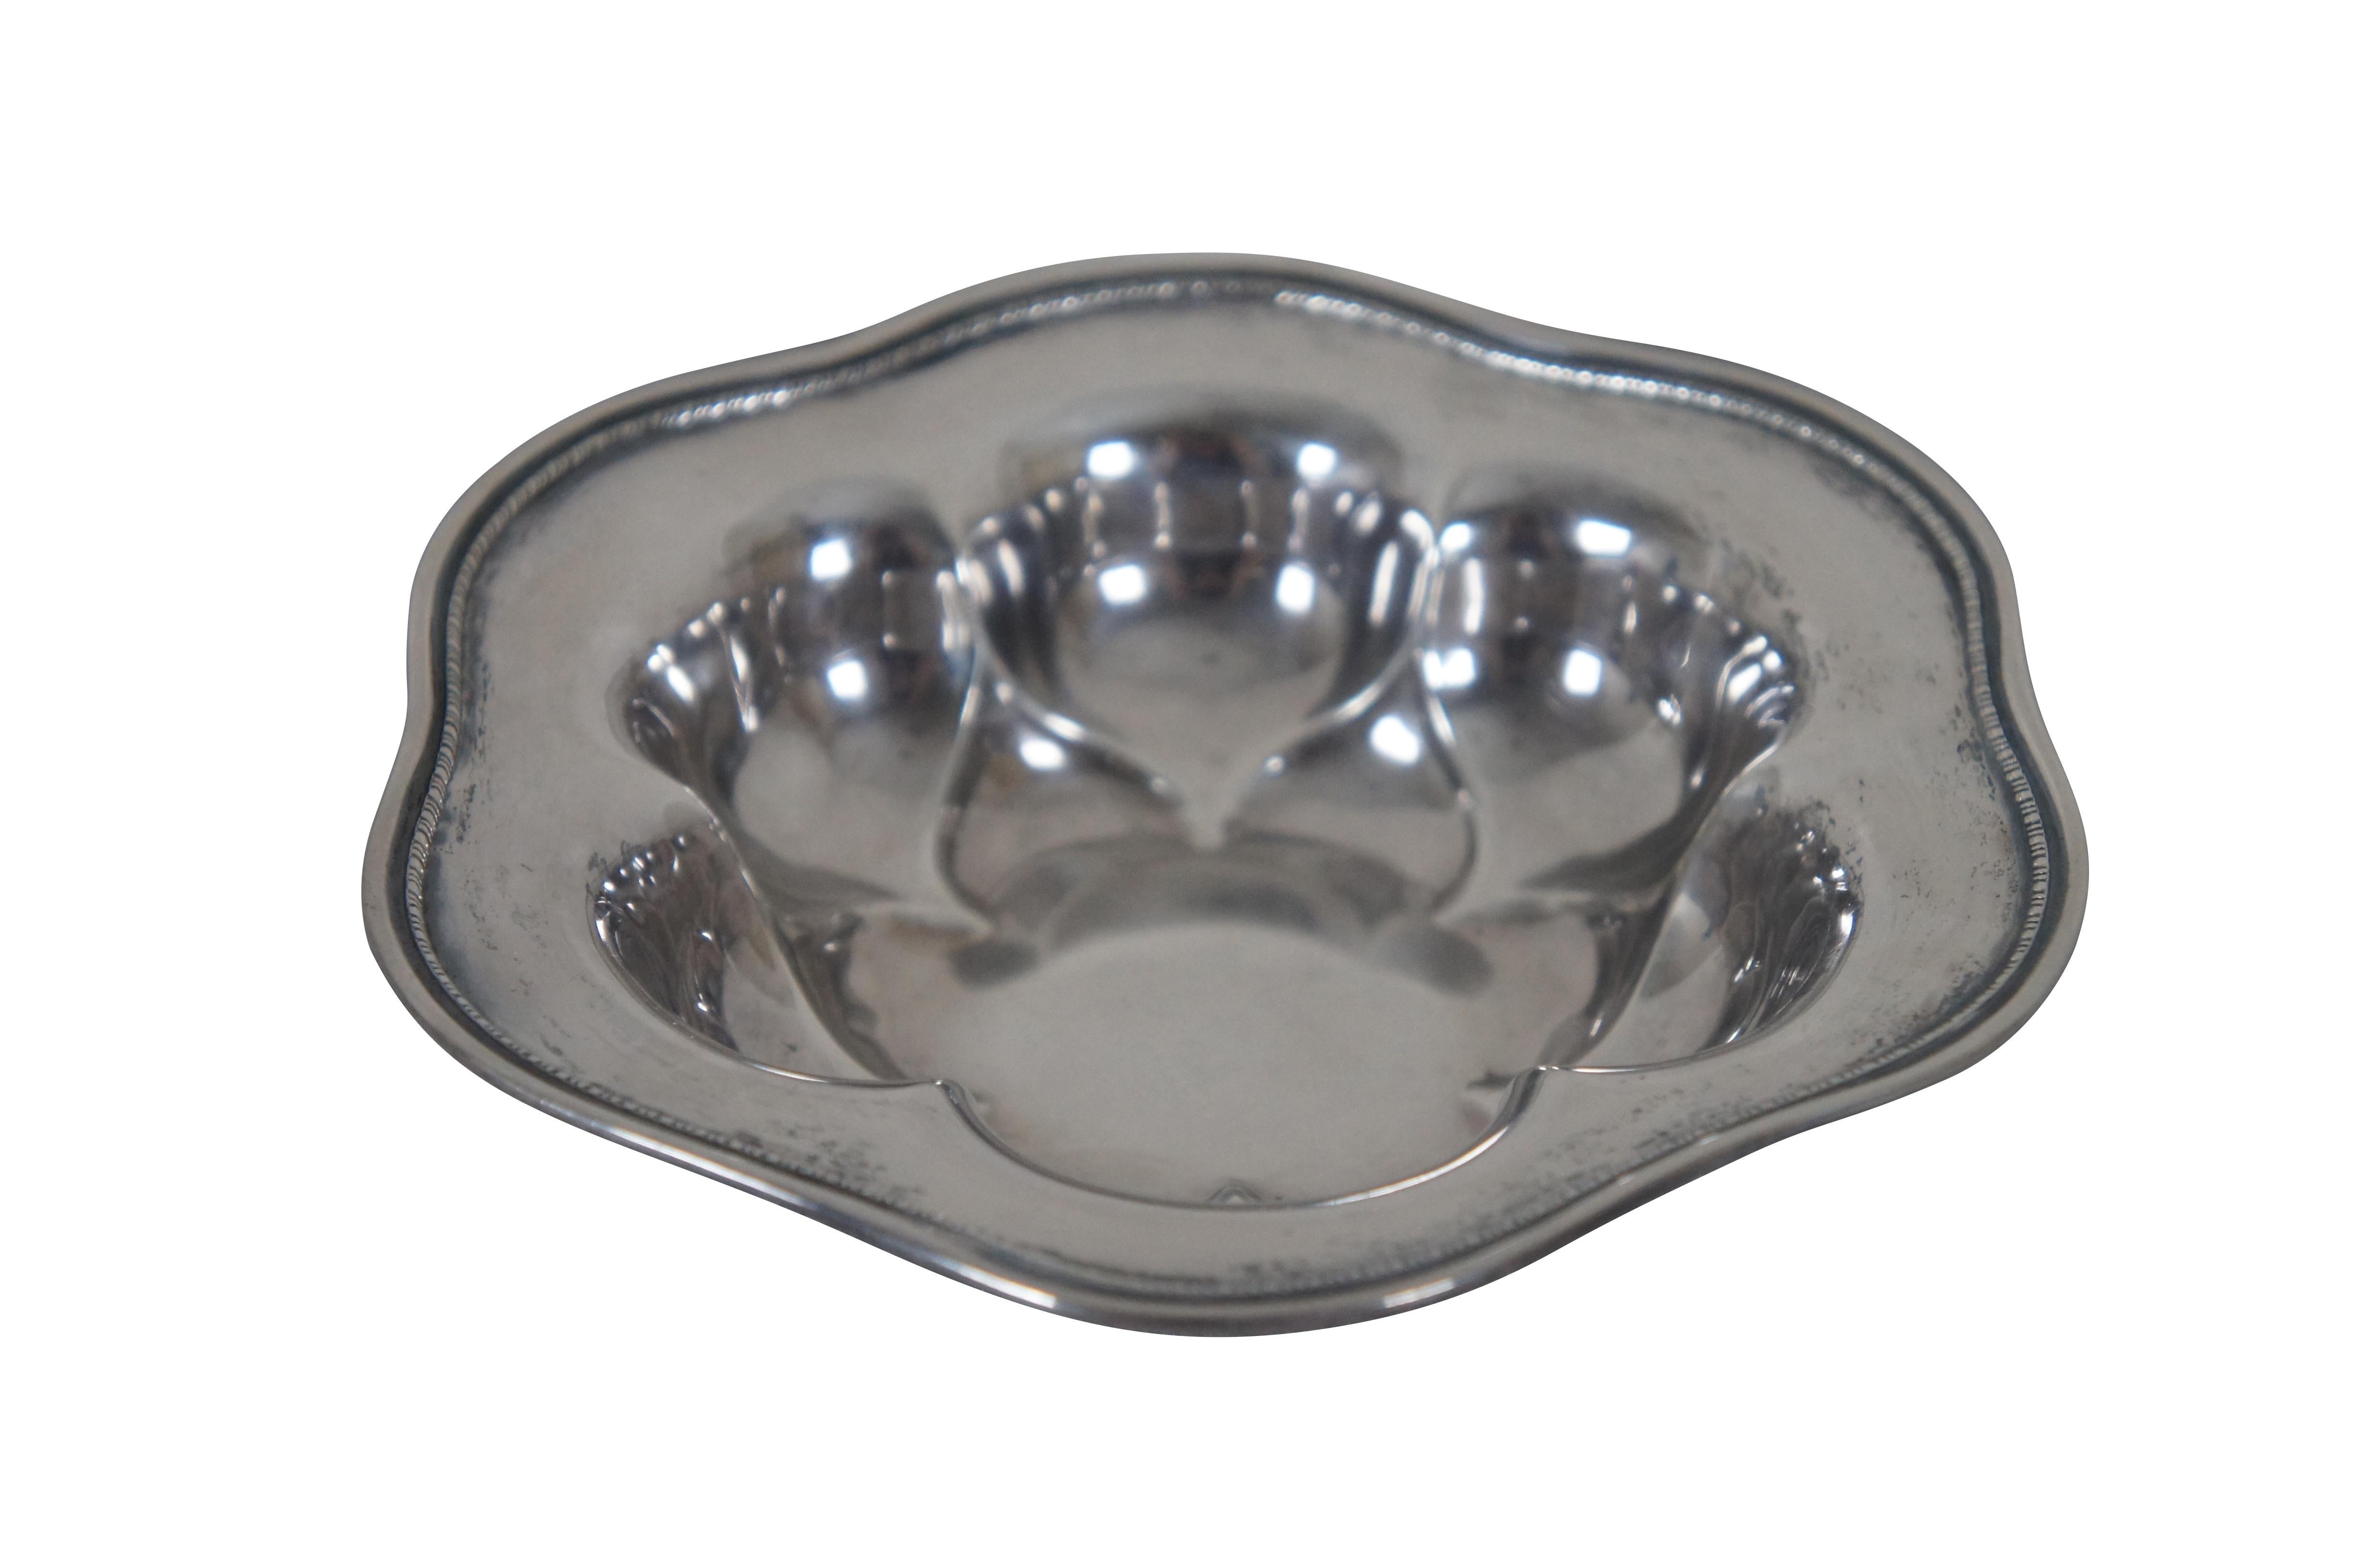 Vintage Frank Whiting scalloped hexagon form sterling silver candy / bon bon / nut dish or bowl, B837.  104 grams, 6